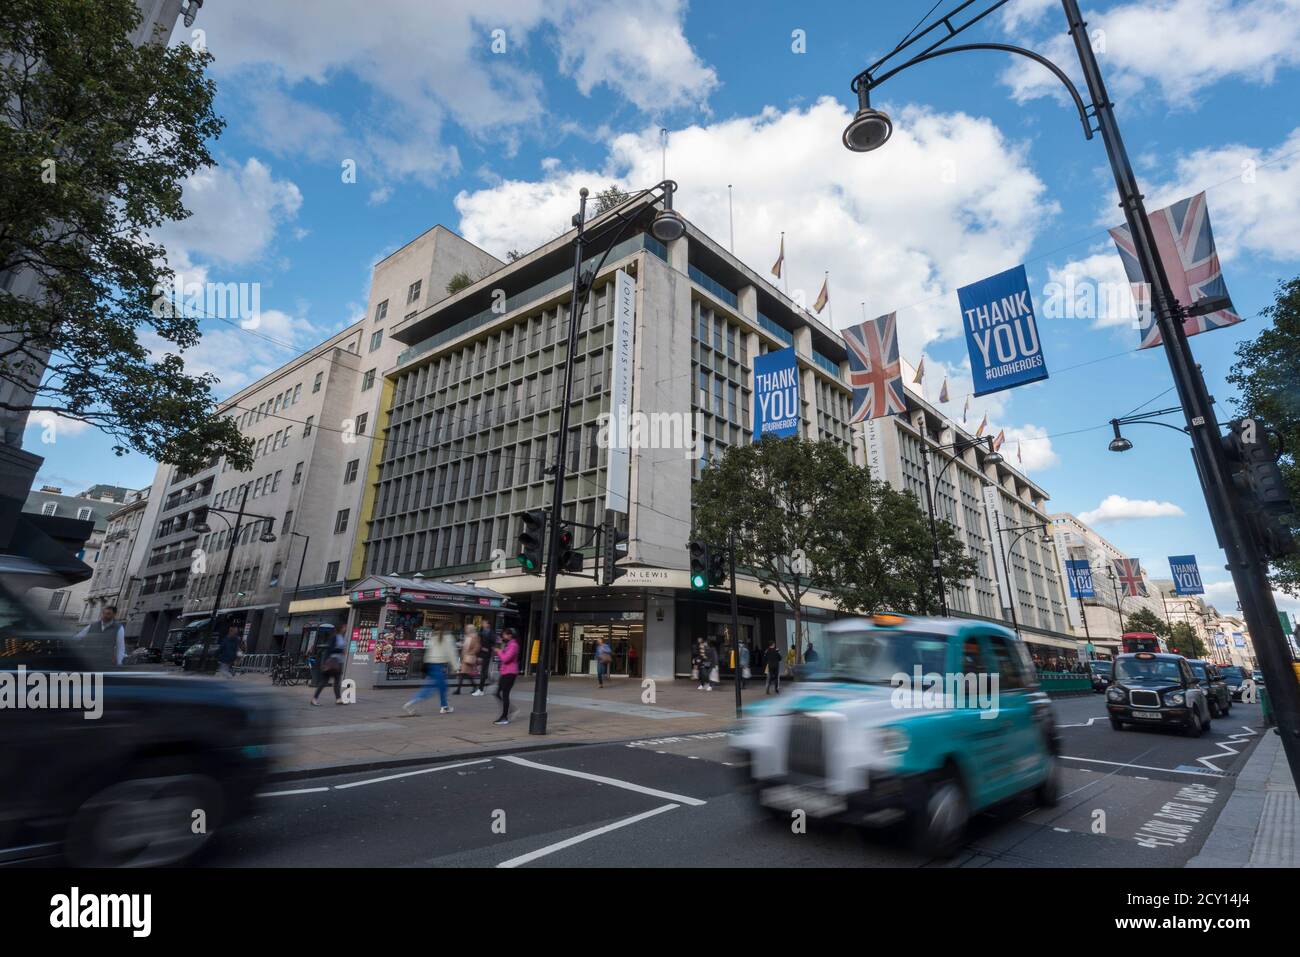 London, UK.  1 October 2020.  Traffic passes John Lewis flagship department store on Oxford Street, traditionally the busiest shopping street in the country.  As a result of the coronavirus pandemic, footfall has declined considerably.  Shoppers are preferring to shop online as people work from home.  Credit: Stephen Chung / Alamy Live News Stock Photo